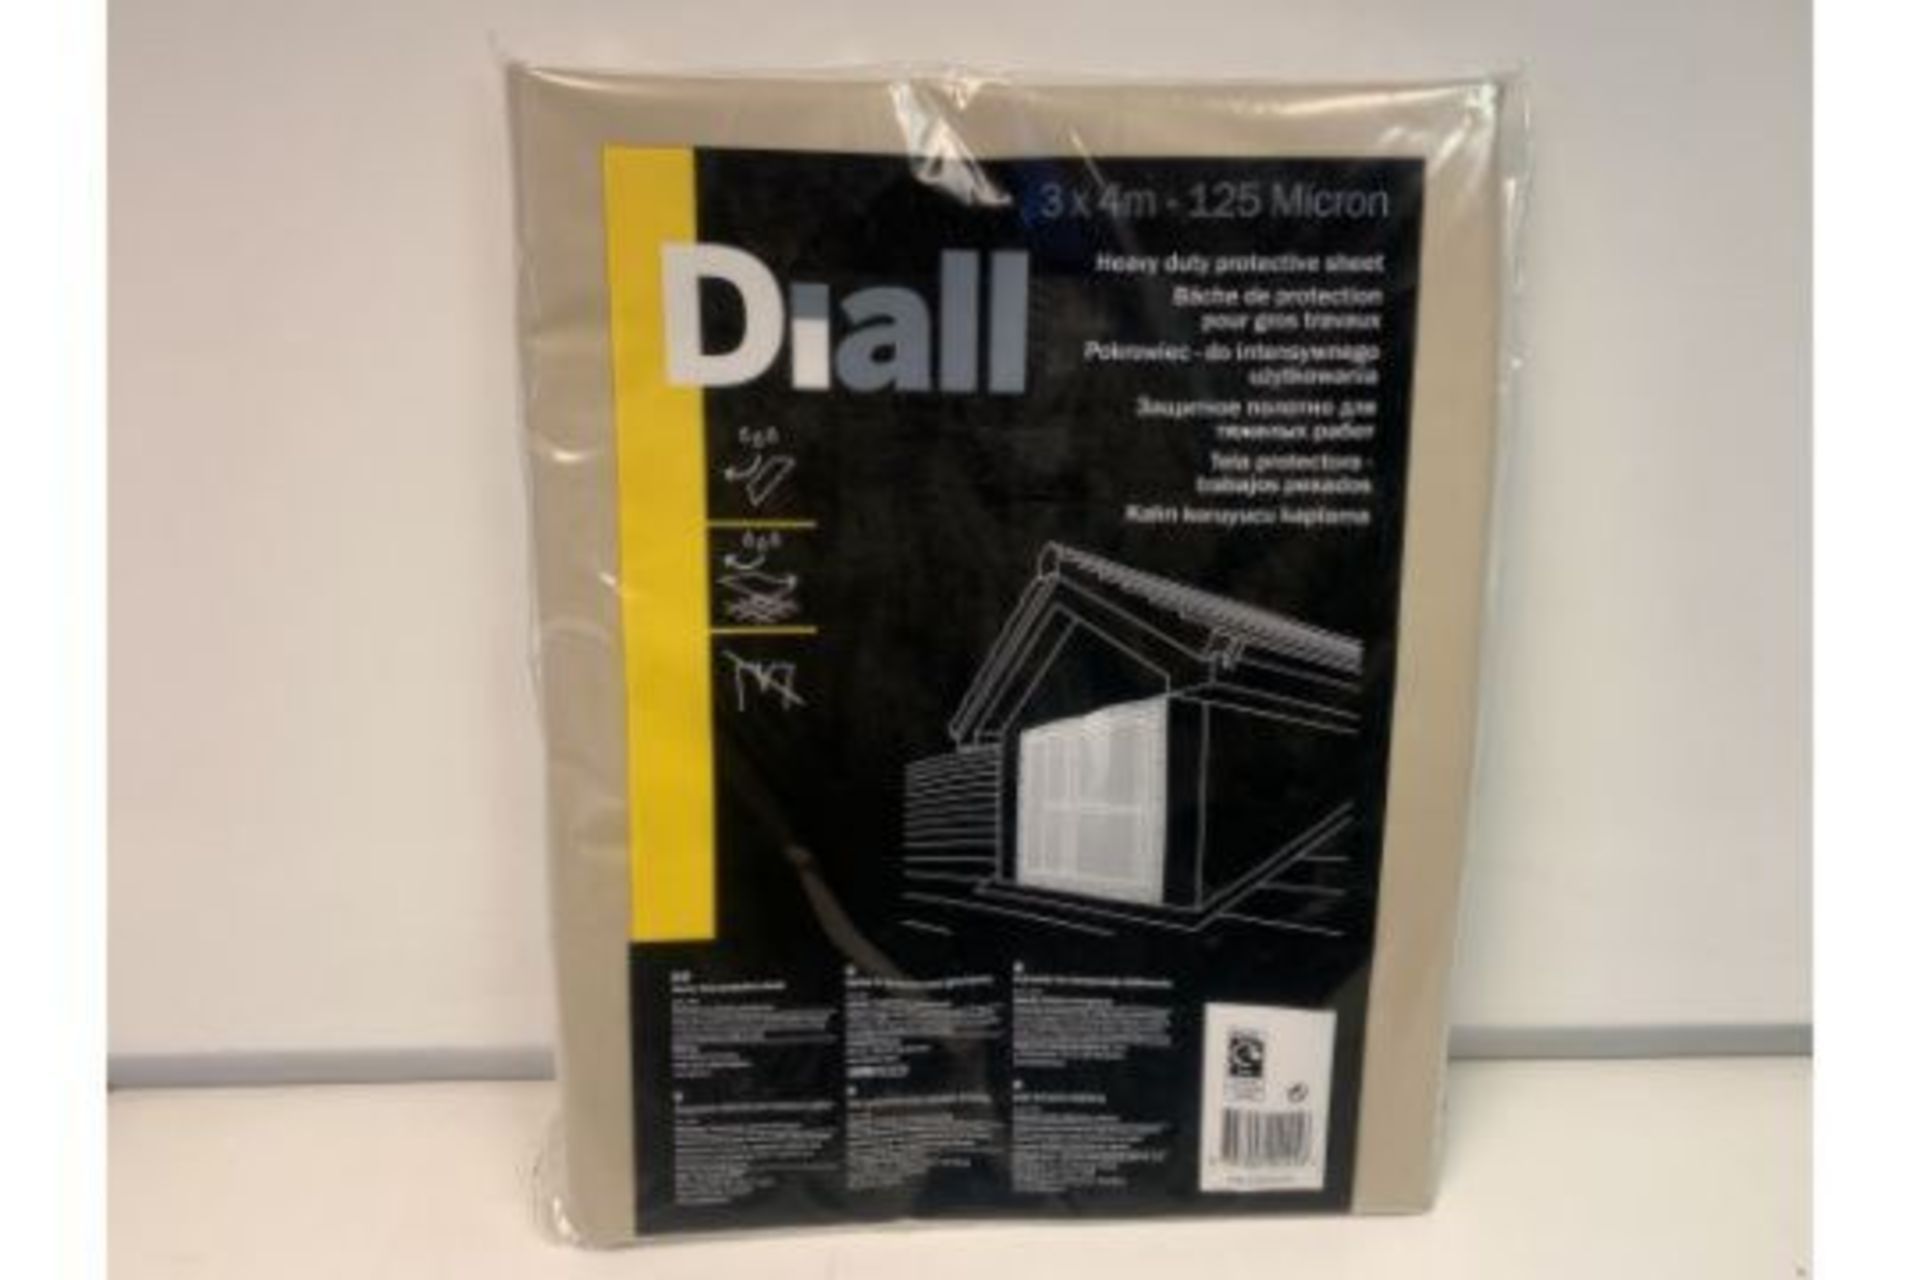 20 X NEW PACKAGED DIALL 3x4M 125 MICRON HEAVY DUTY PROTECTIVE SHEETS (ROW19)